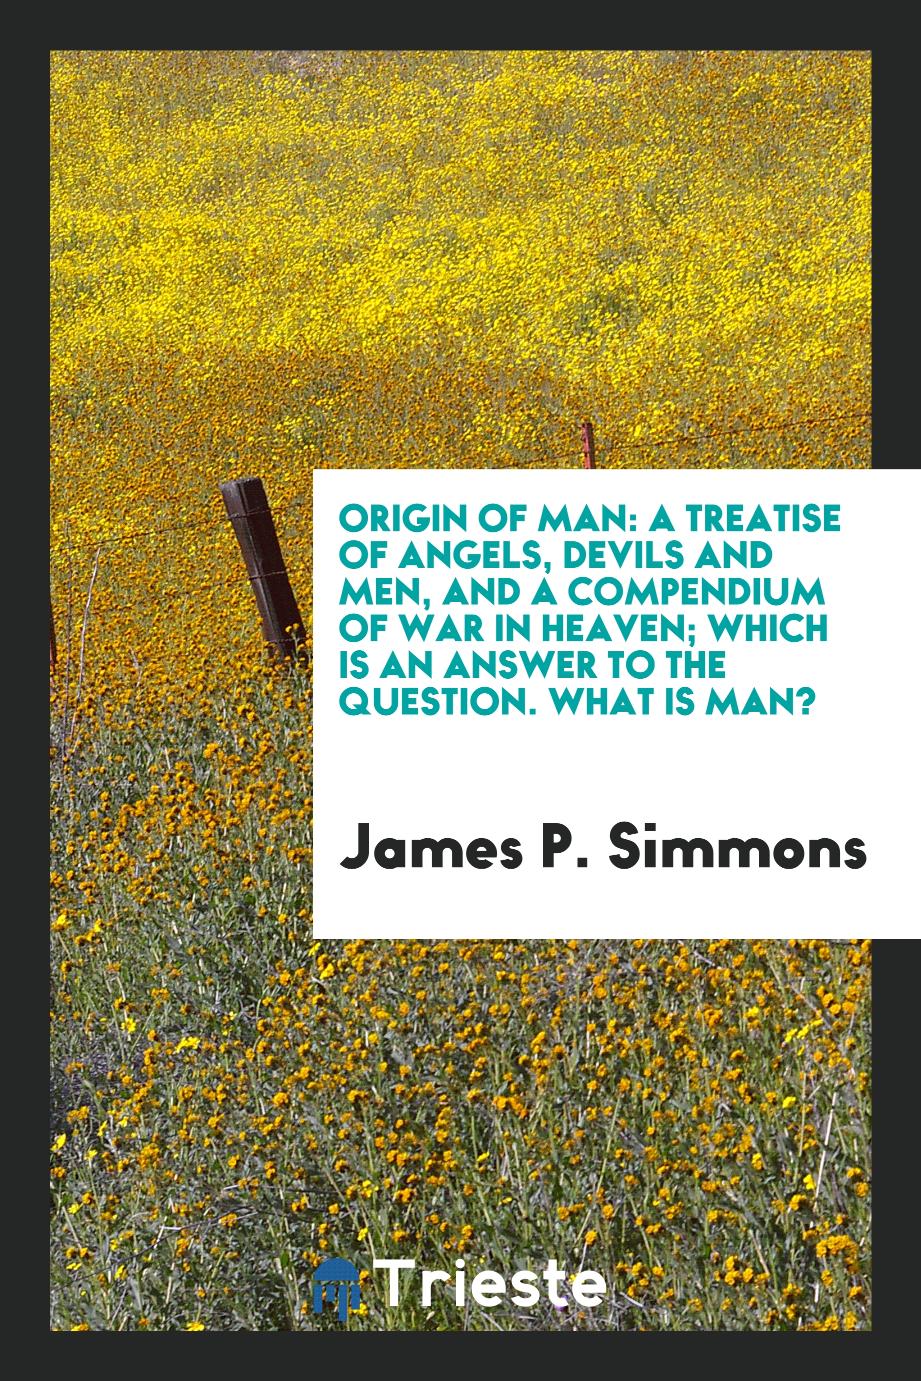 Origin of Man: A Treatise of Angels, Devils and Men, and a Compendium of War in Heaven; which is an answer to the question. What is man?